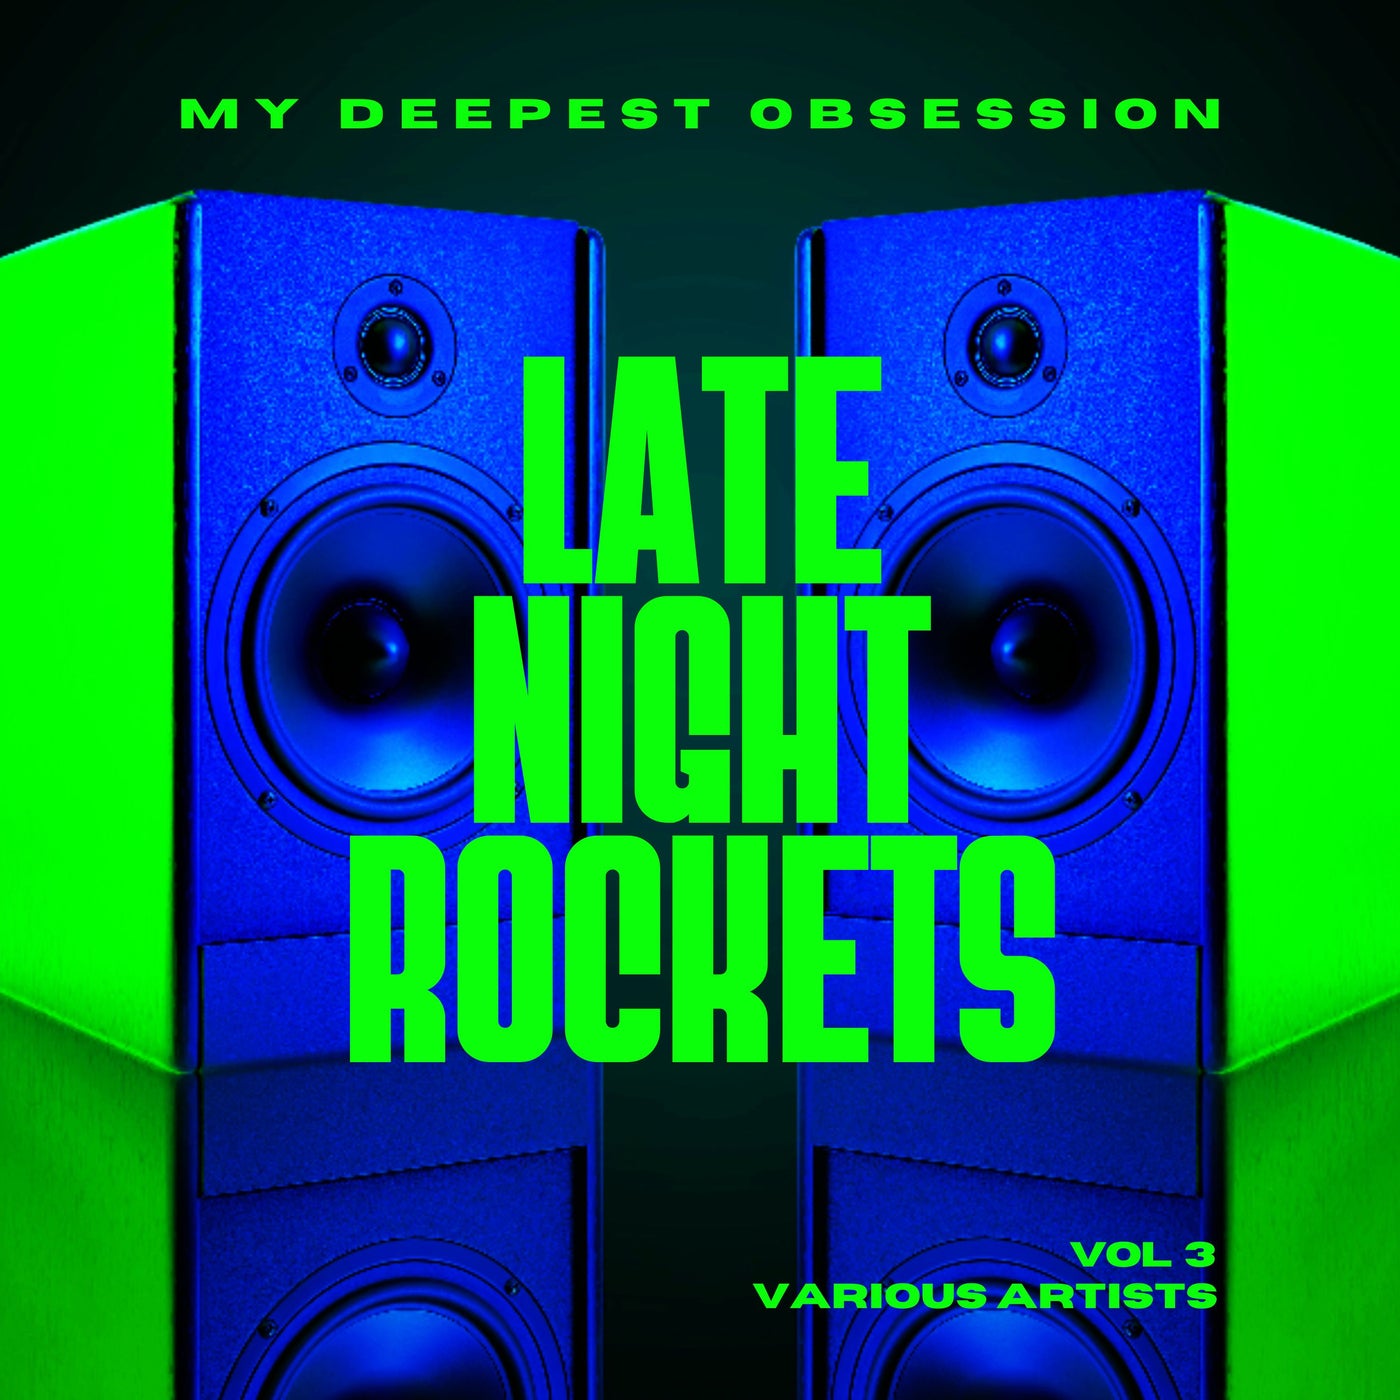 My Deepest Obsession, Vol. 3 (Late Night Rockets)